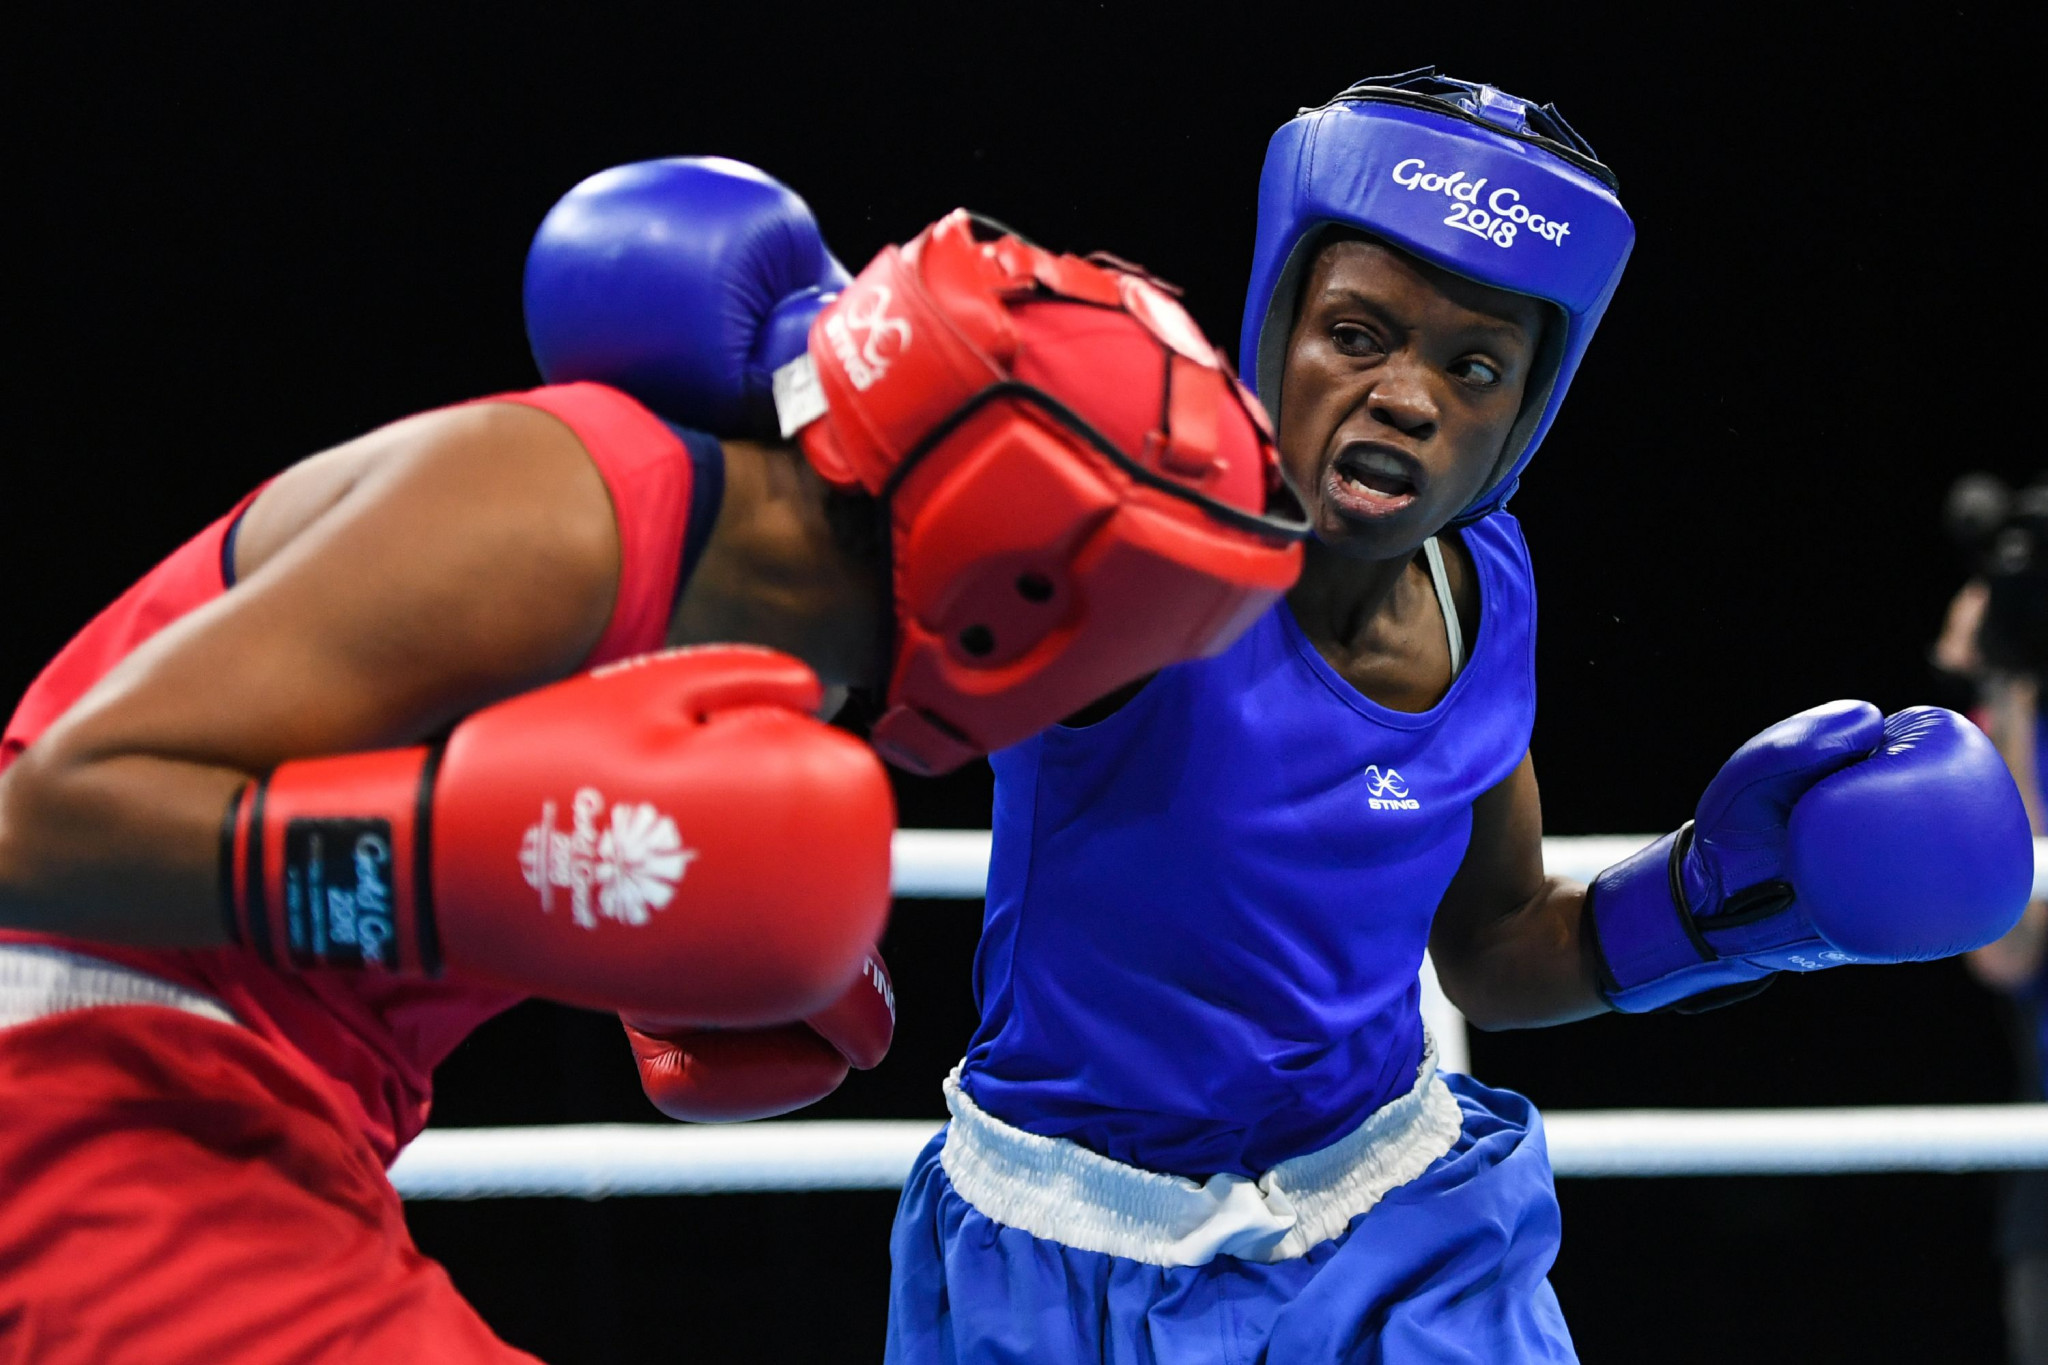 Ongare Christine, right, won the silver medal at the Gold Coast 2018 Commonwealth Games ©Getty Images